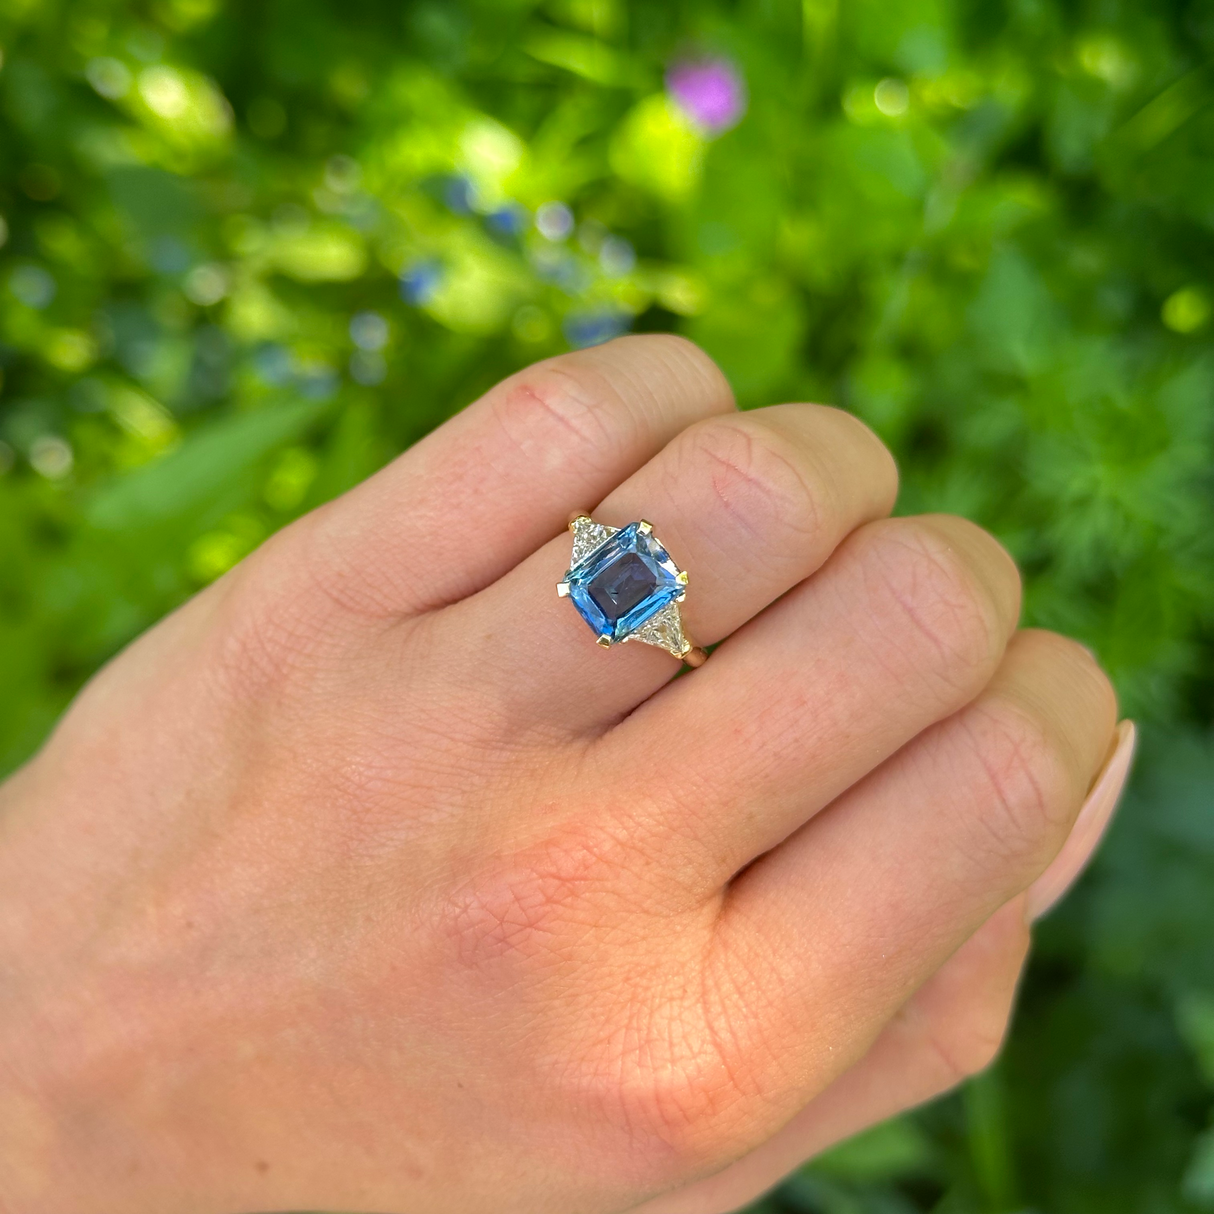 Vintage, Blue Sapphire and Trilliant-cut Diamond Three Stone ring, 18ct Yellow Gold worn on hand.